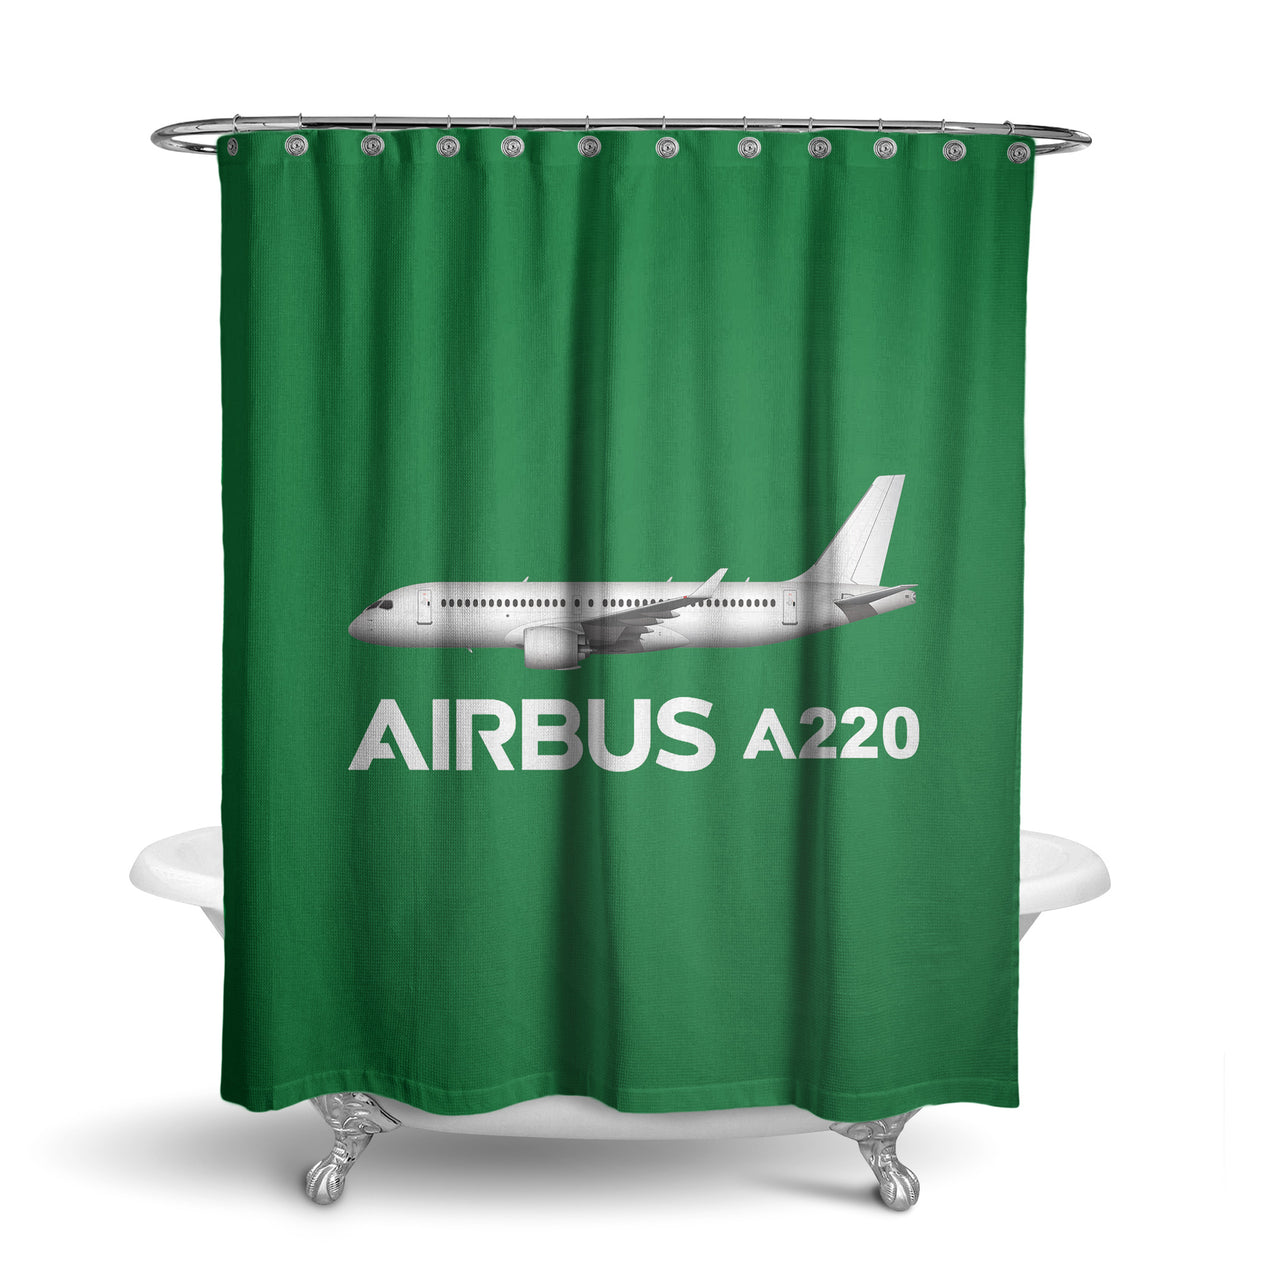 The Airbus A220 Designed Shower Curtains